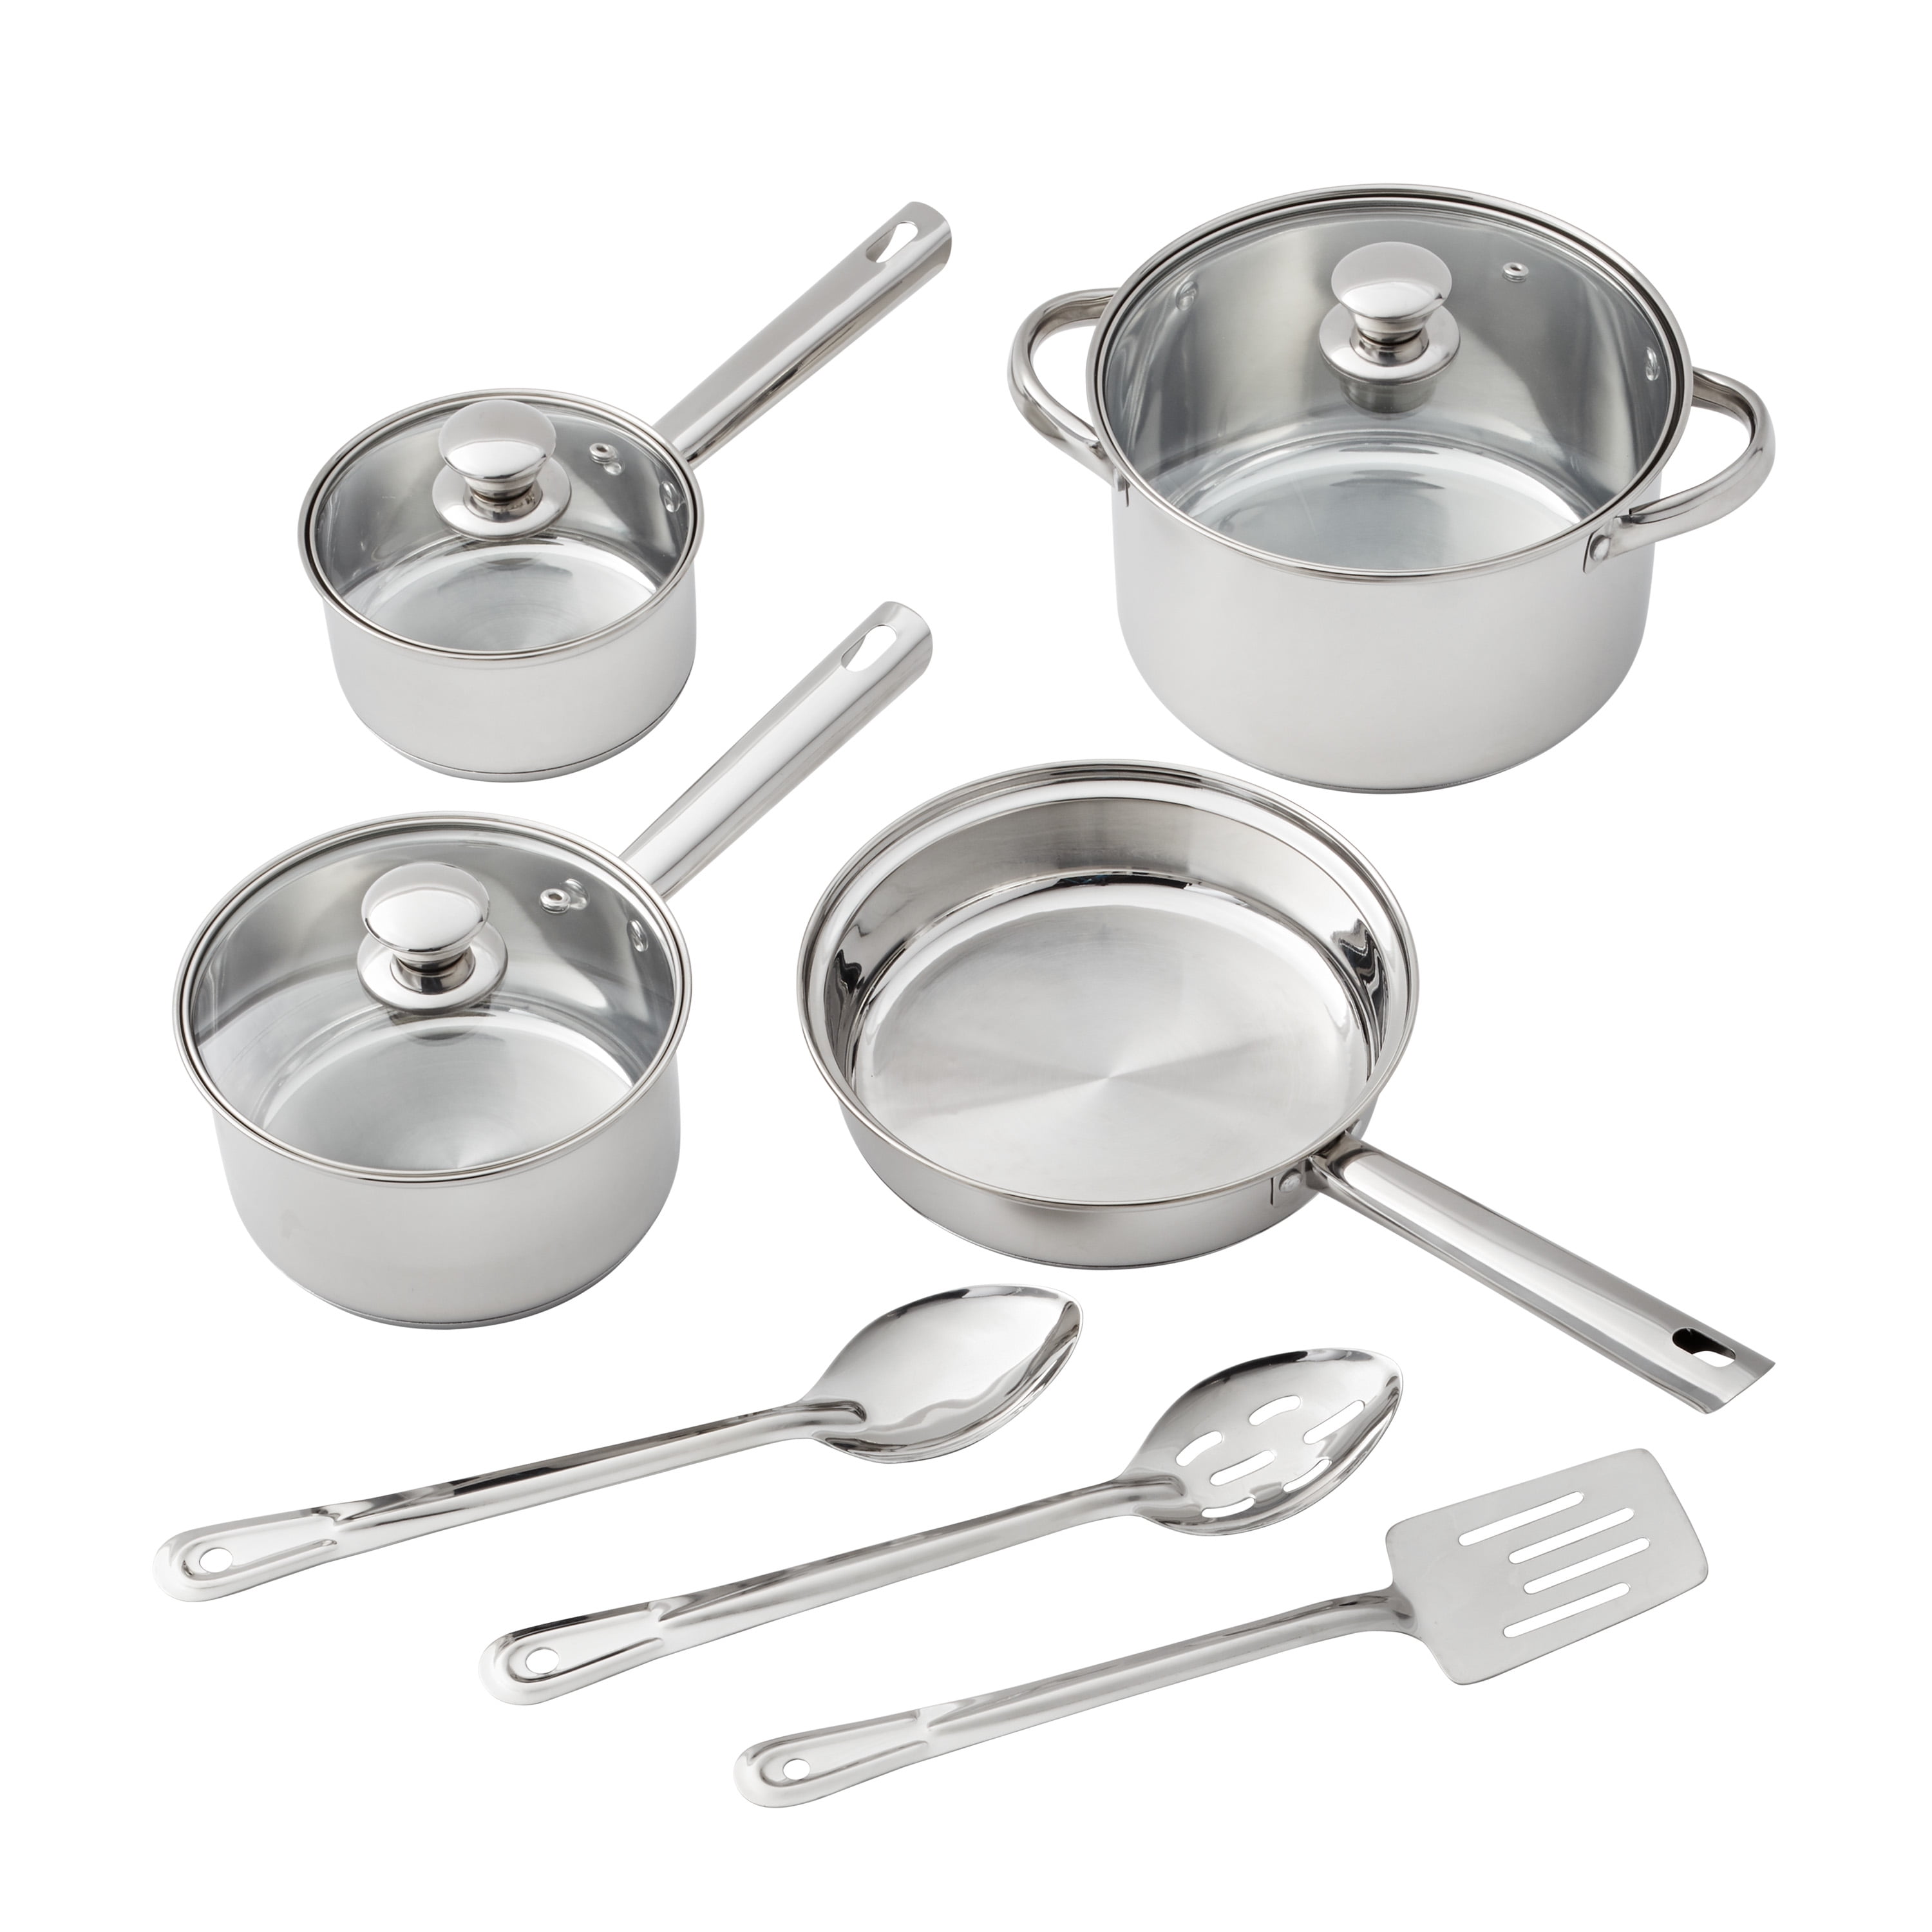 Stainless Steel Induction Cookware 10PC Set Pots Lids Fry Pans Oven Safe Kitchen 